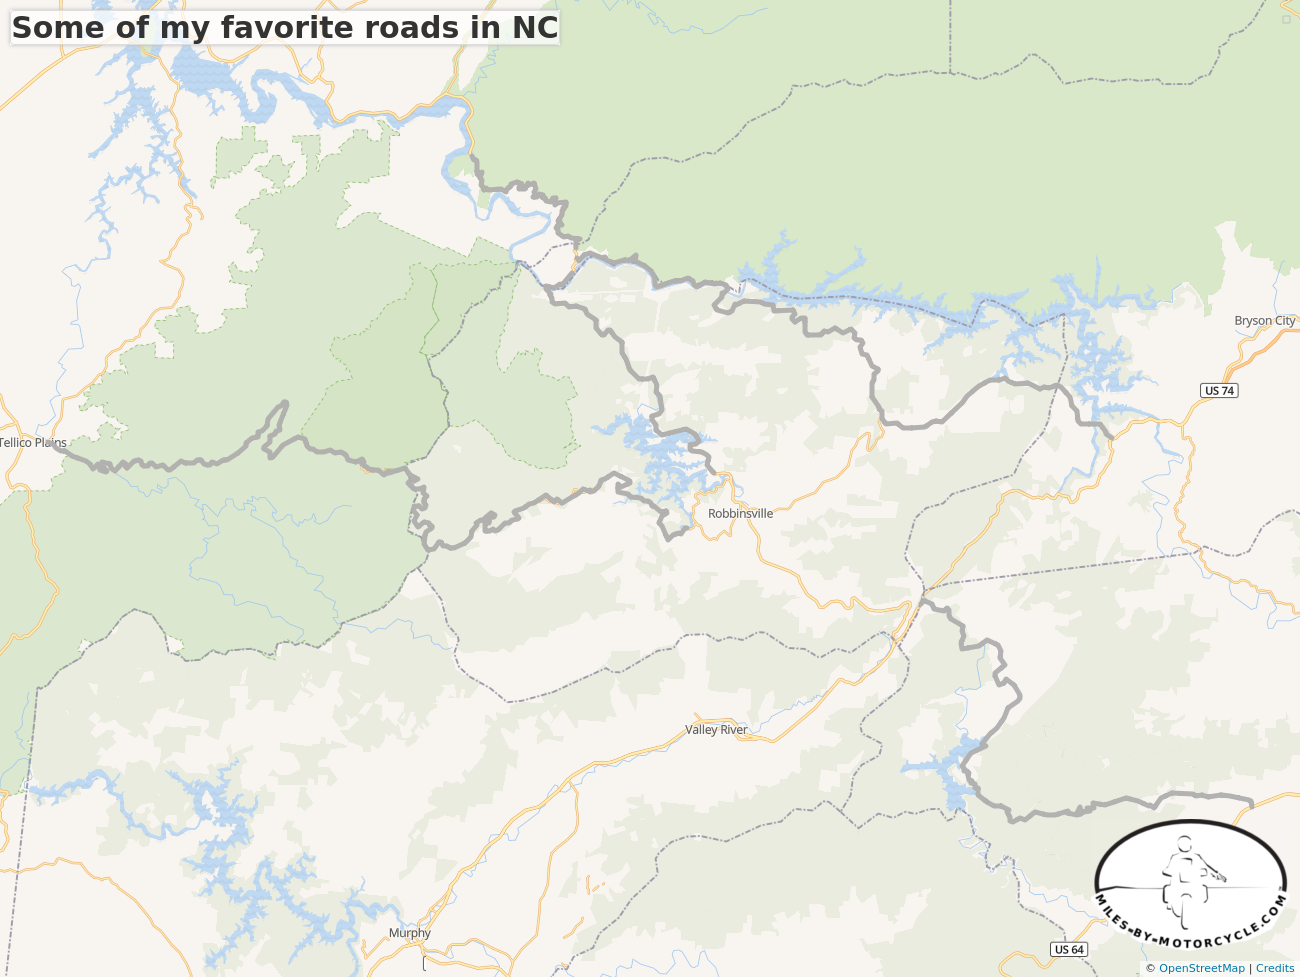 Some of my favorite roads in NC